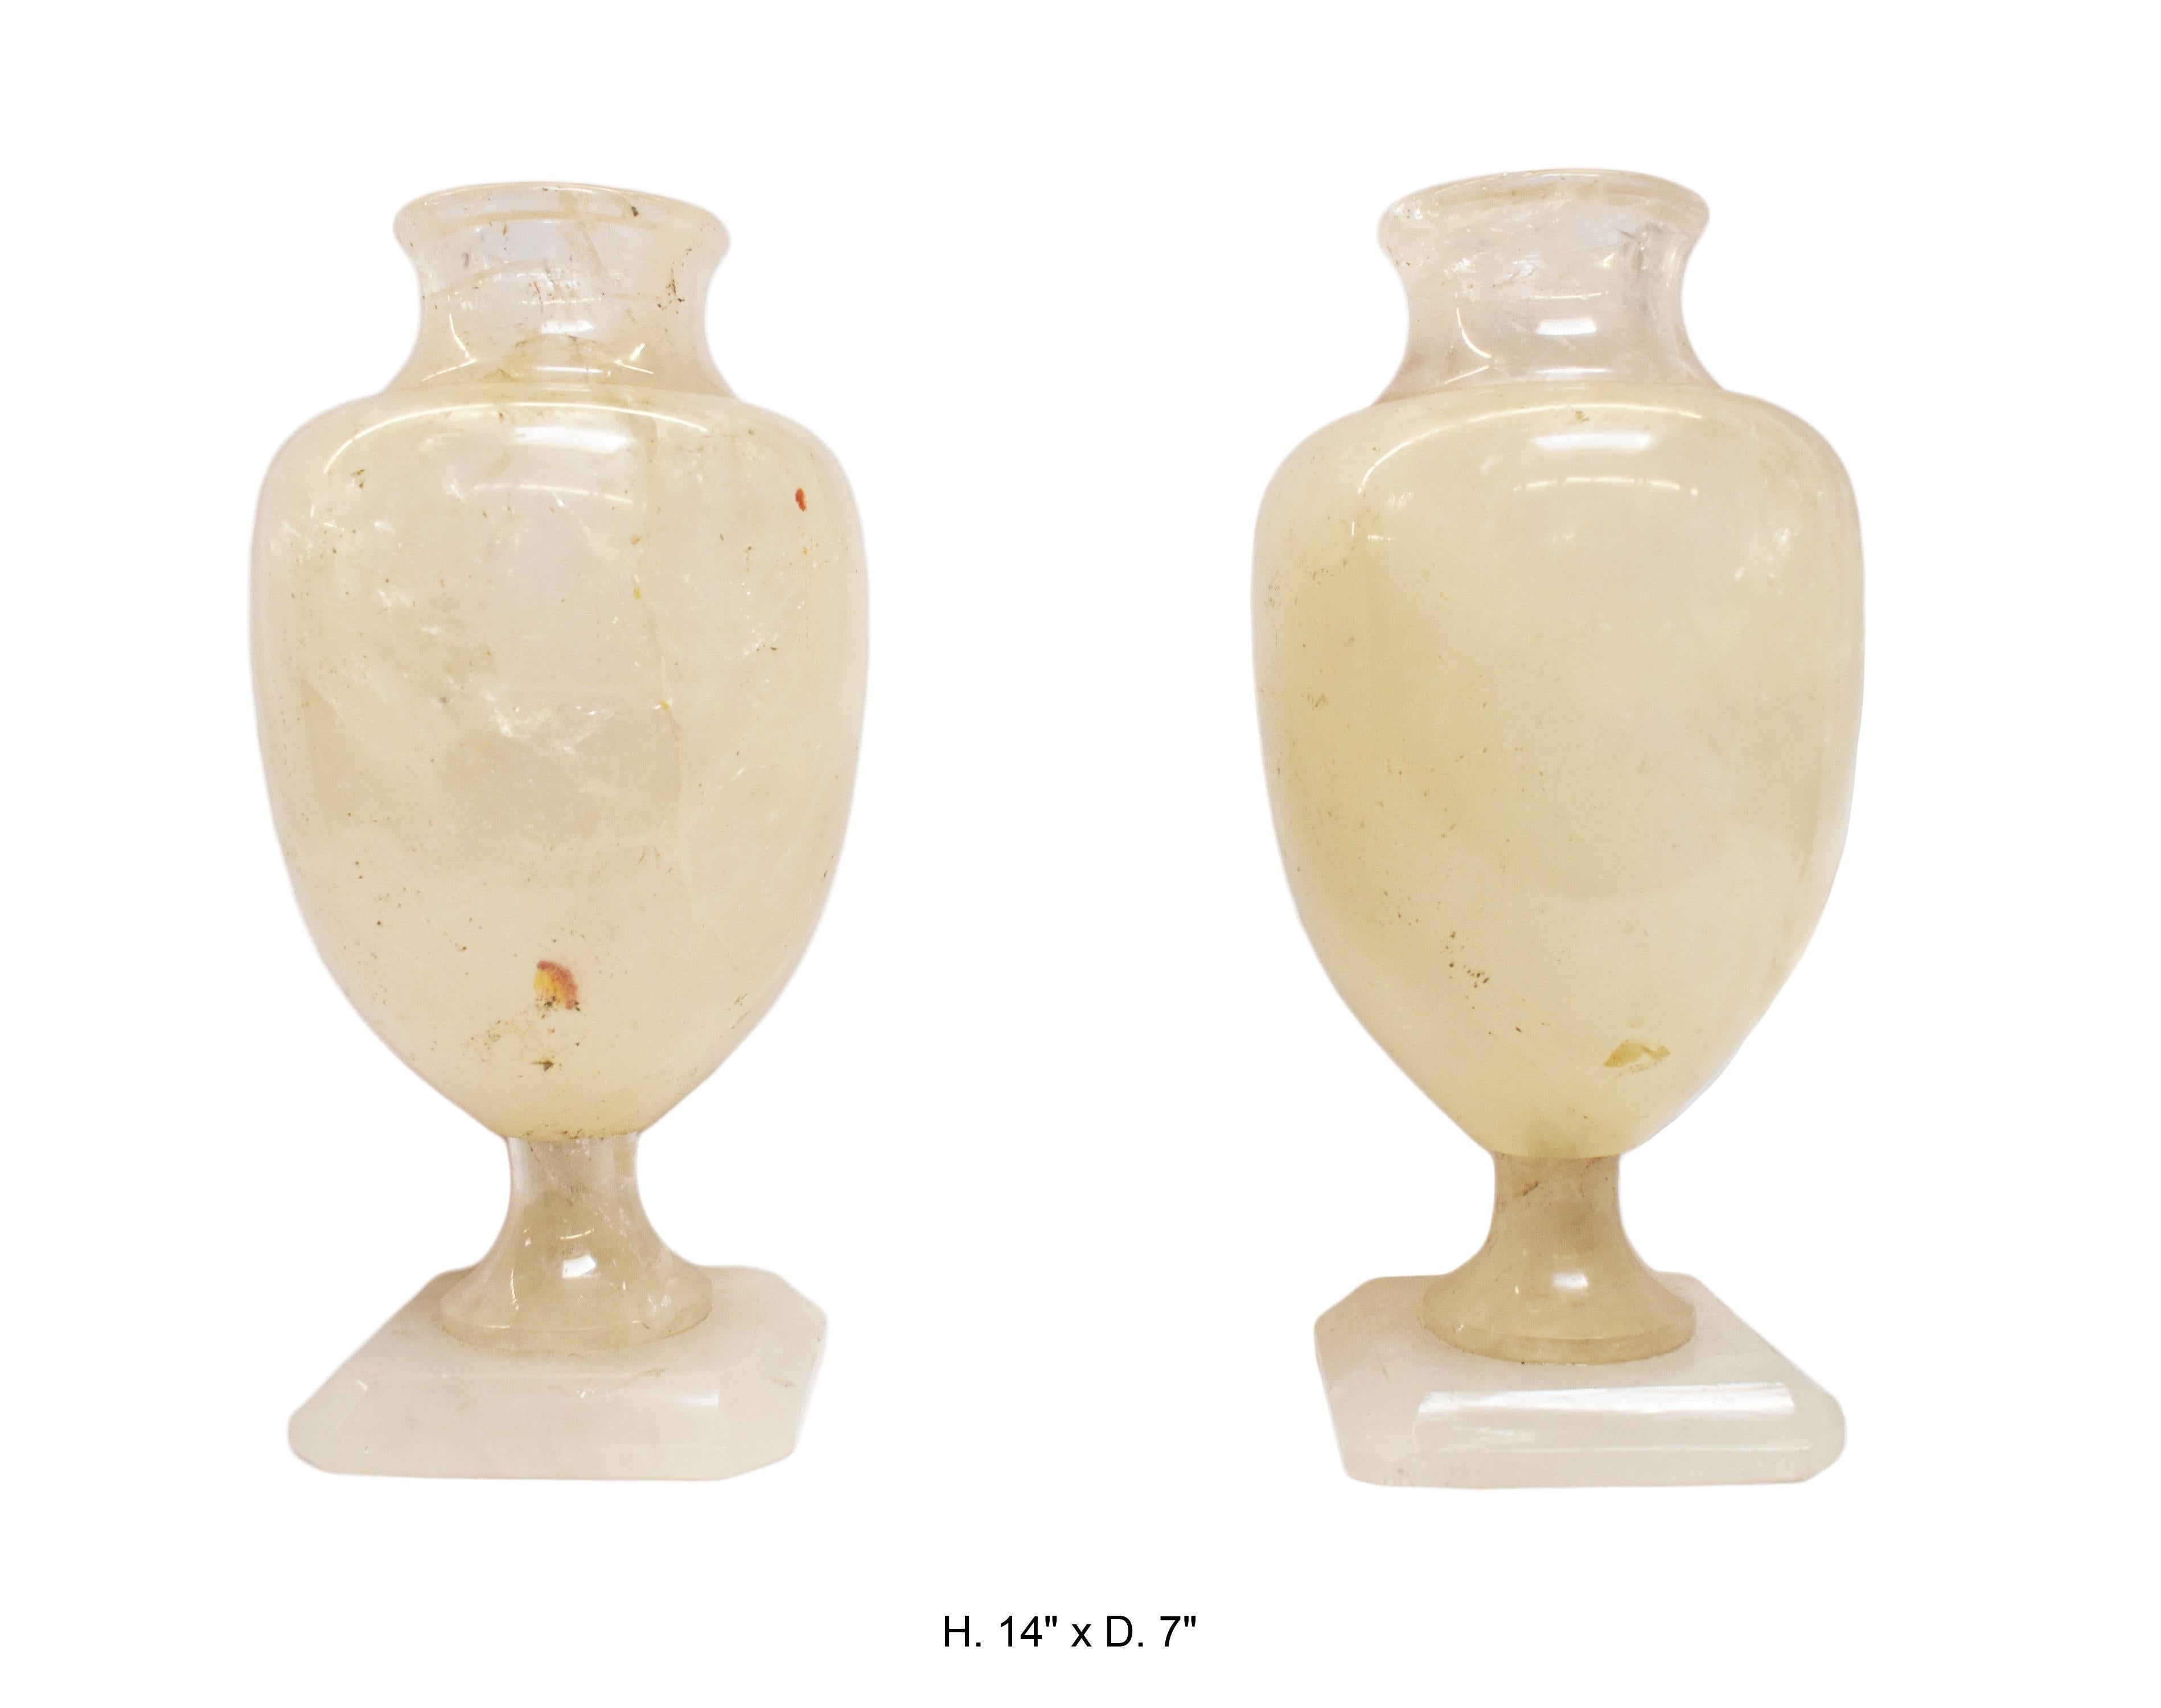 Unique large pair of neoclassical style hand carved and hand-polished rock crystal vases. 
The inside of the vases were masterfully carved out.

Measures: H. 14